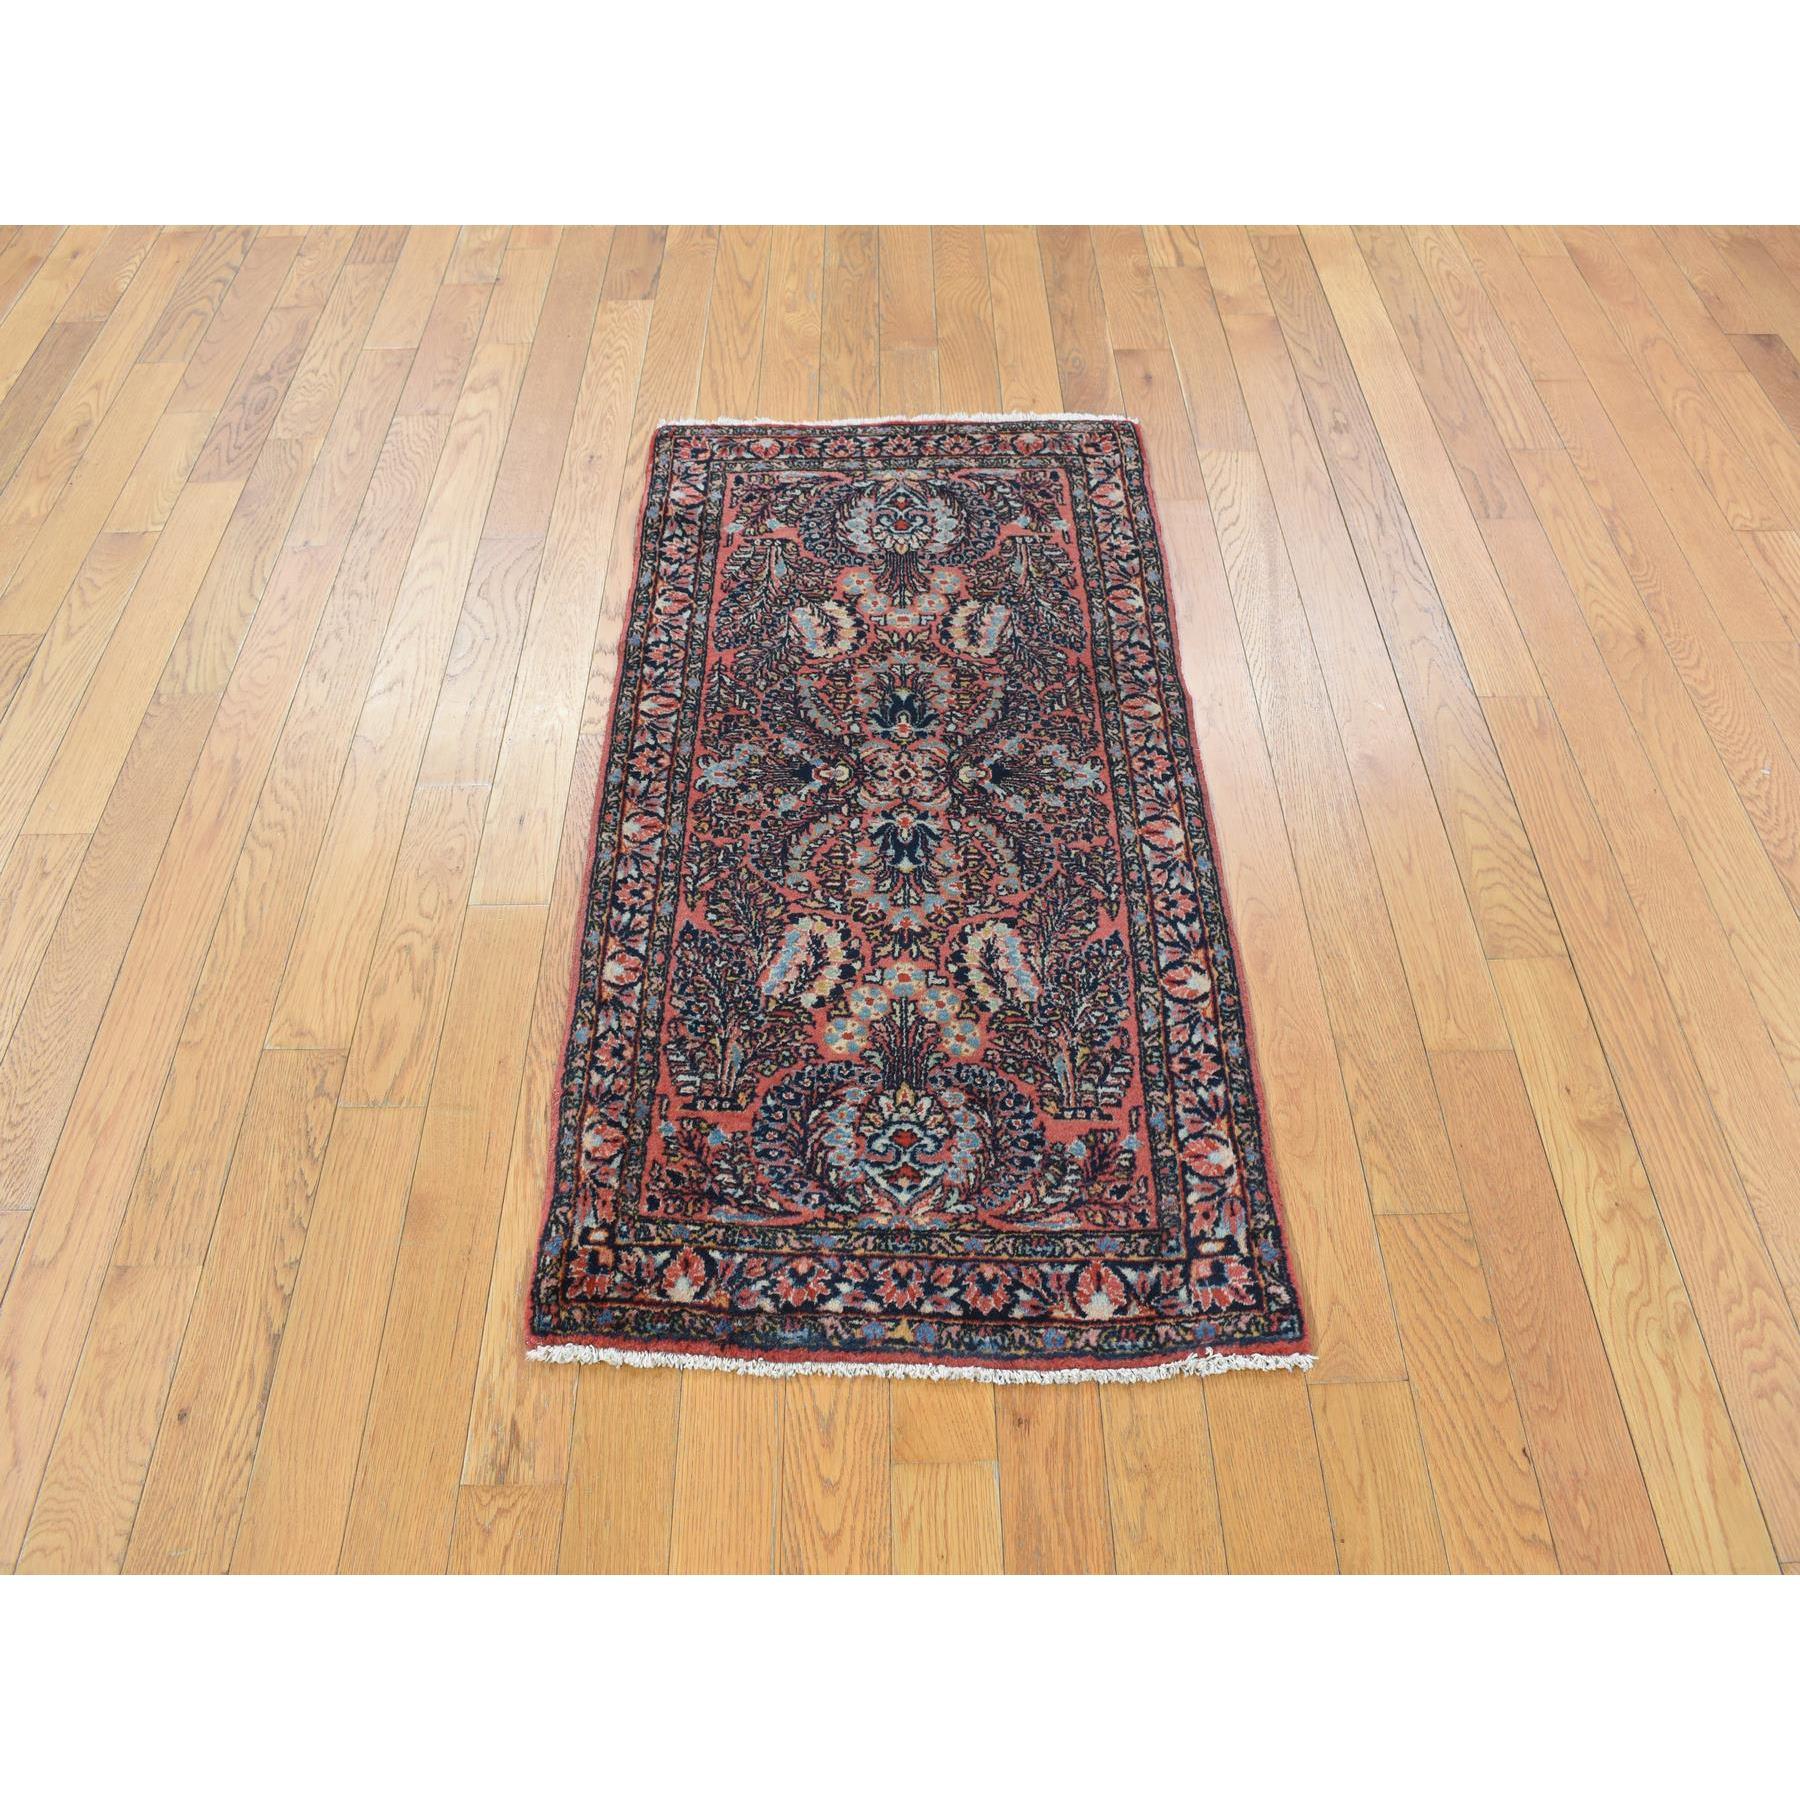 Medieval Red Antique Persian Sarouk Full Pile Clean and Soft Hand Knotted Mat Rug 2'1